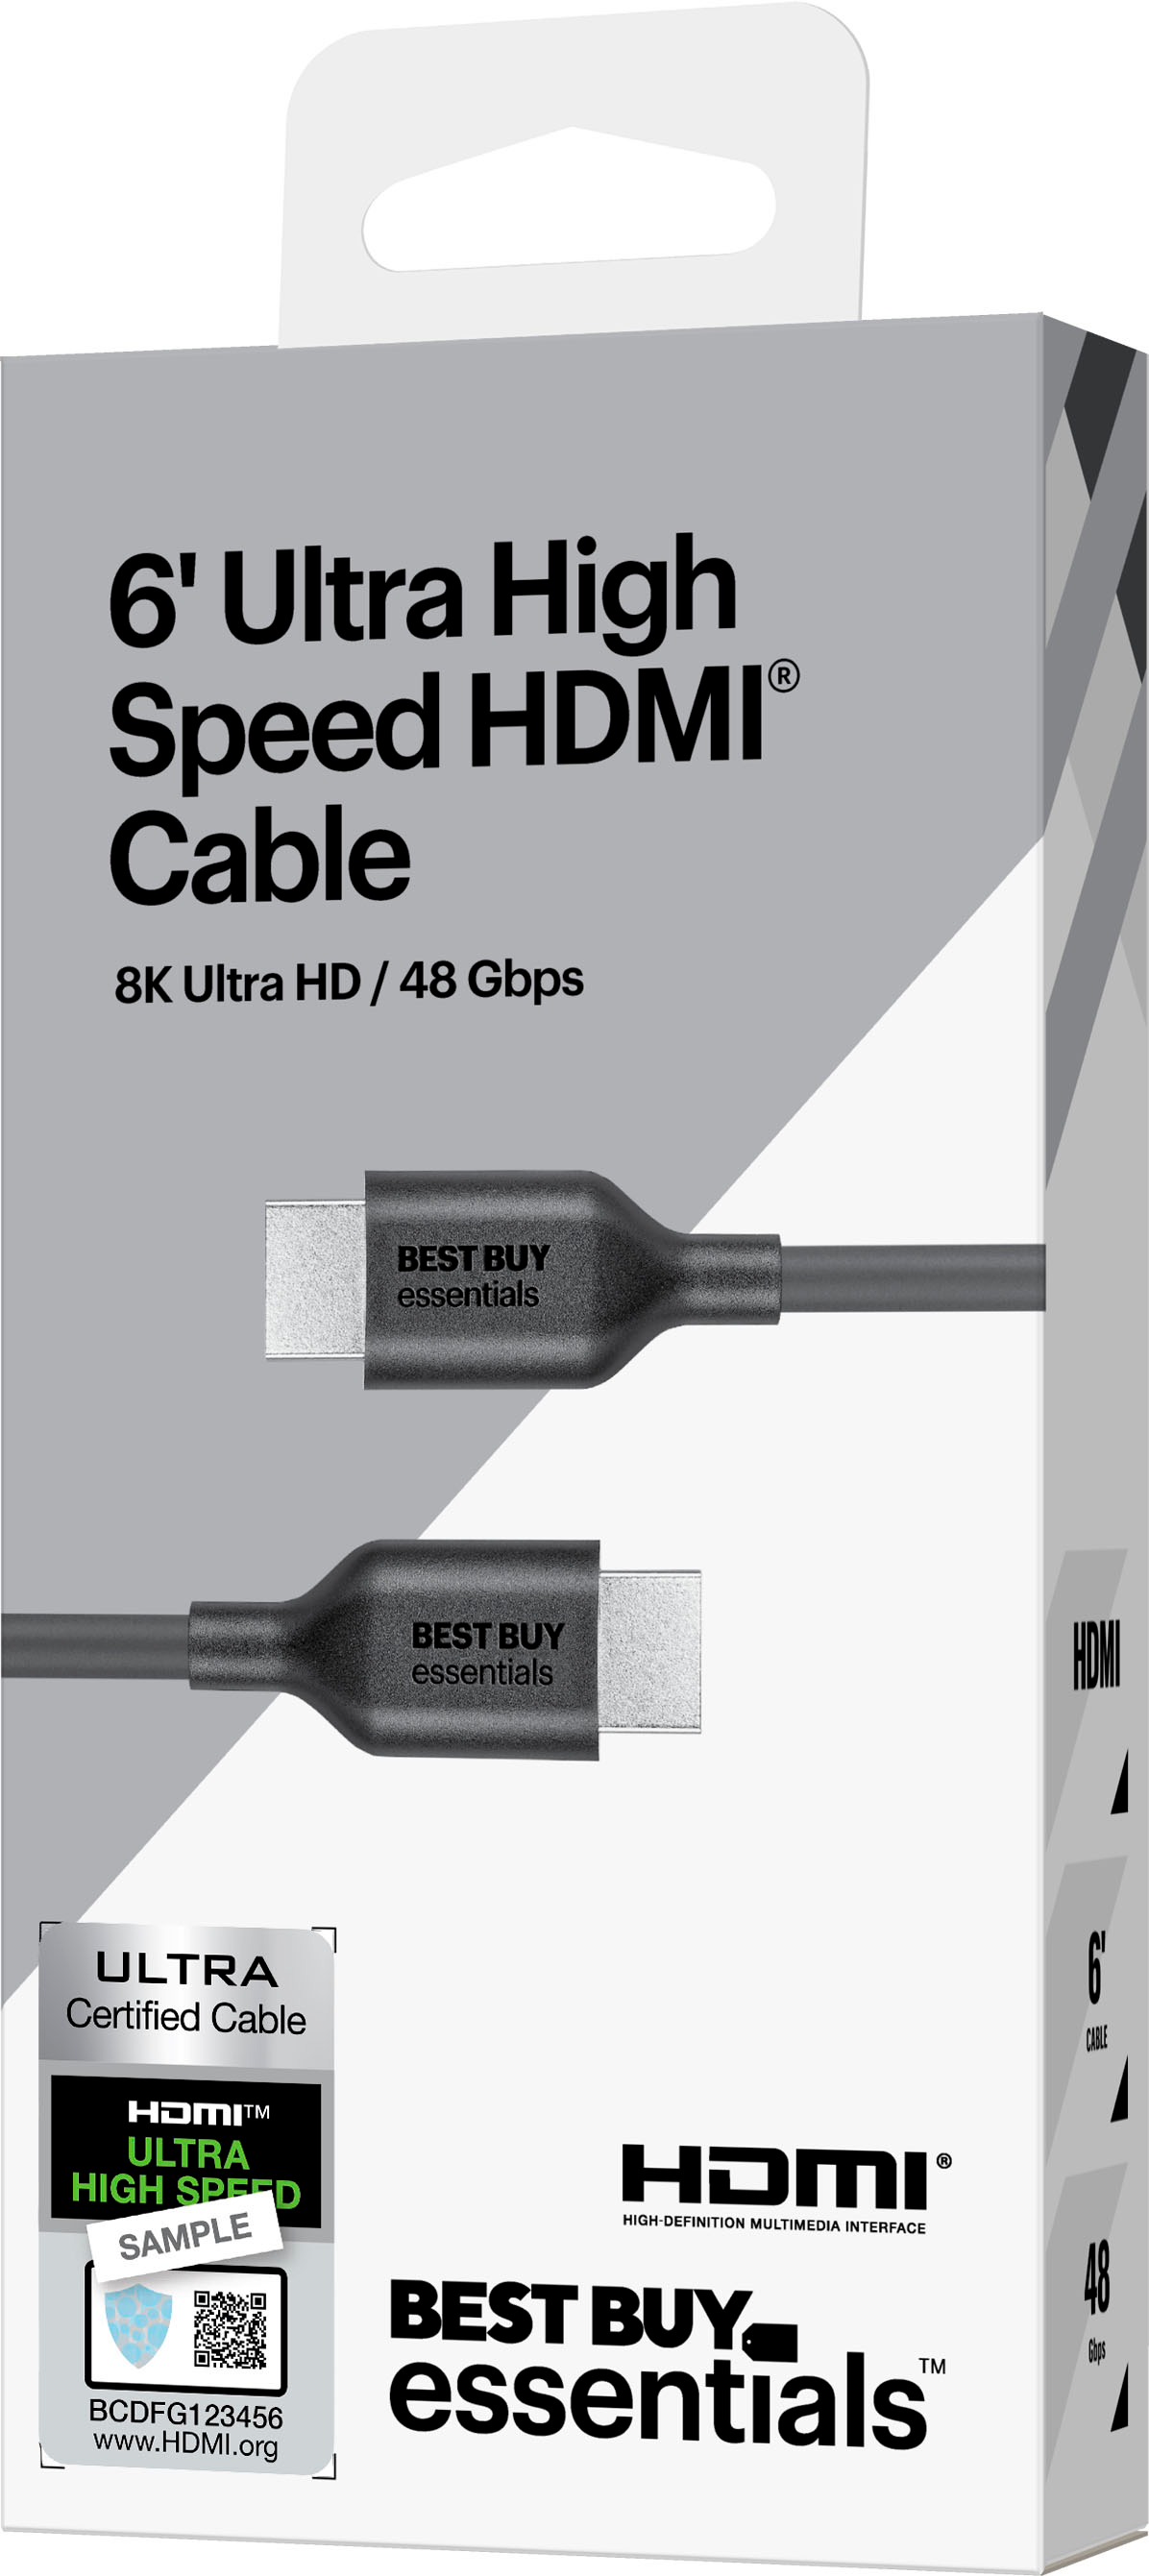 Belkin Ultra HD HDMI 2.1 Cable 6.6FT/2M, 4K High Speed , 48Gbps HDMI 2.1  Cord - Dolby Vision HDR & 8K@60Hz Capable, Compatible w/ Playstation, PS4